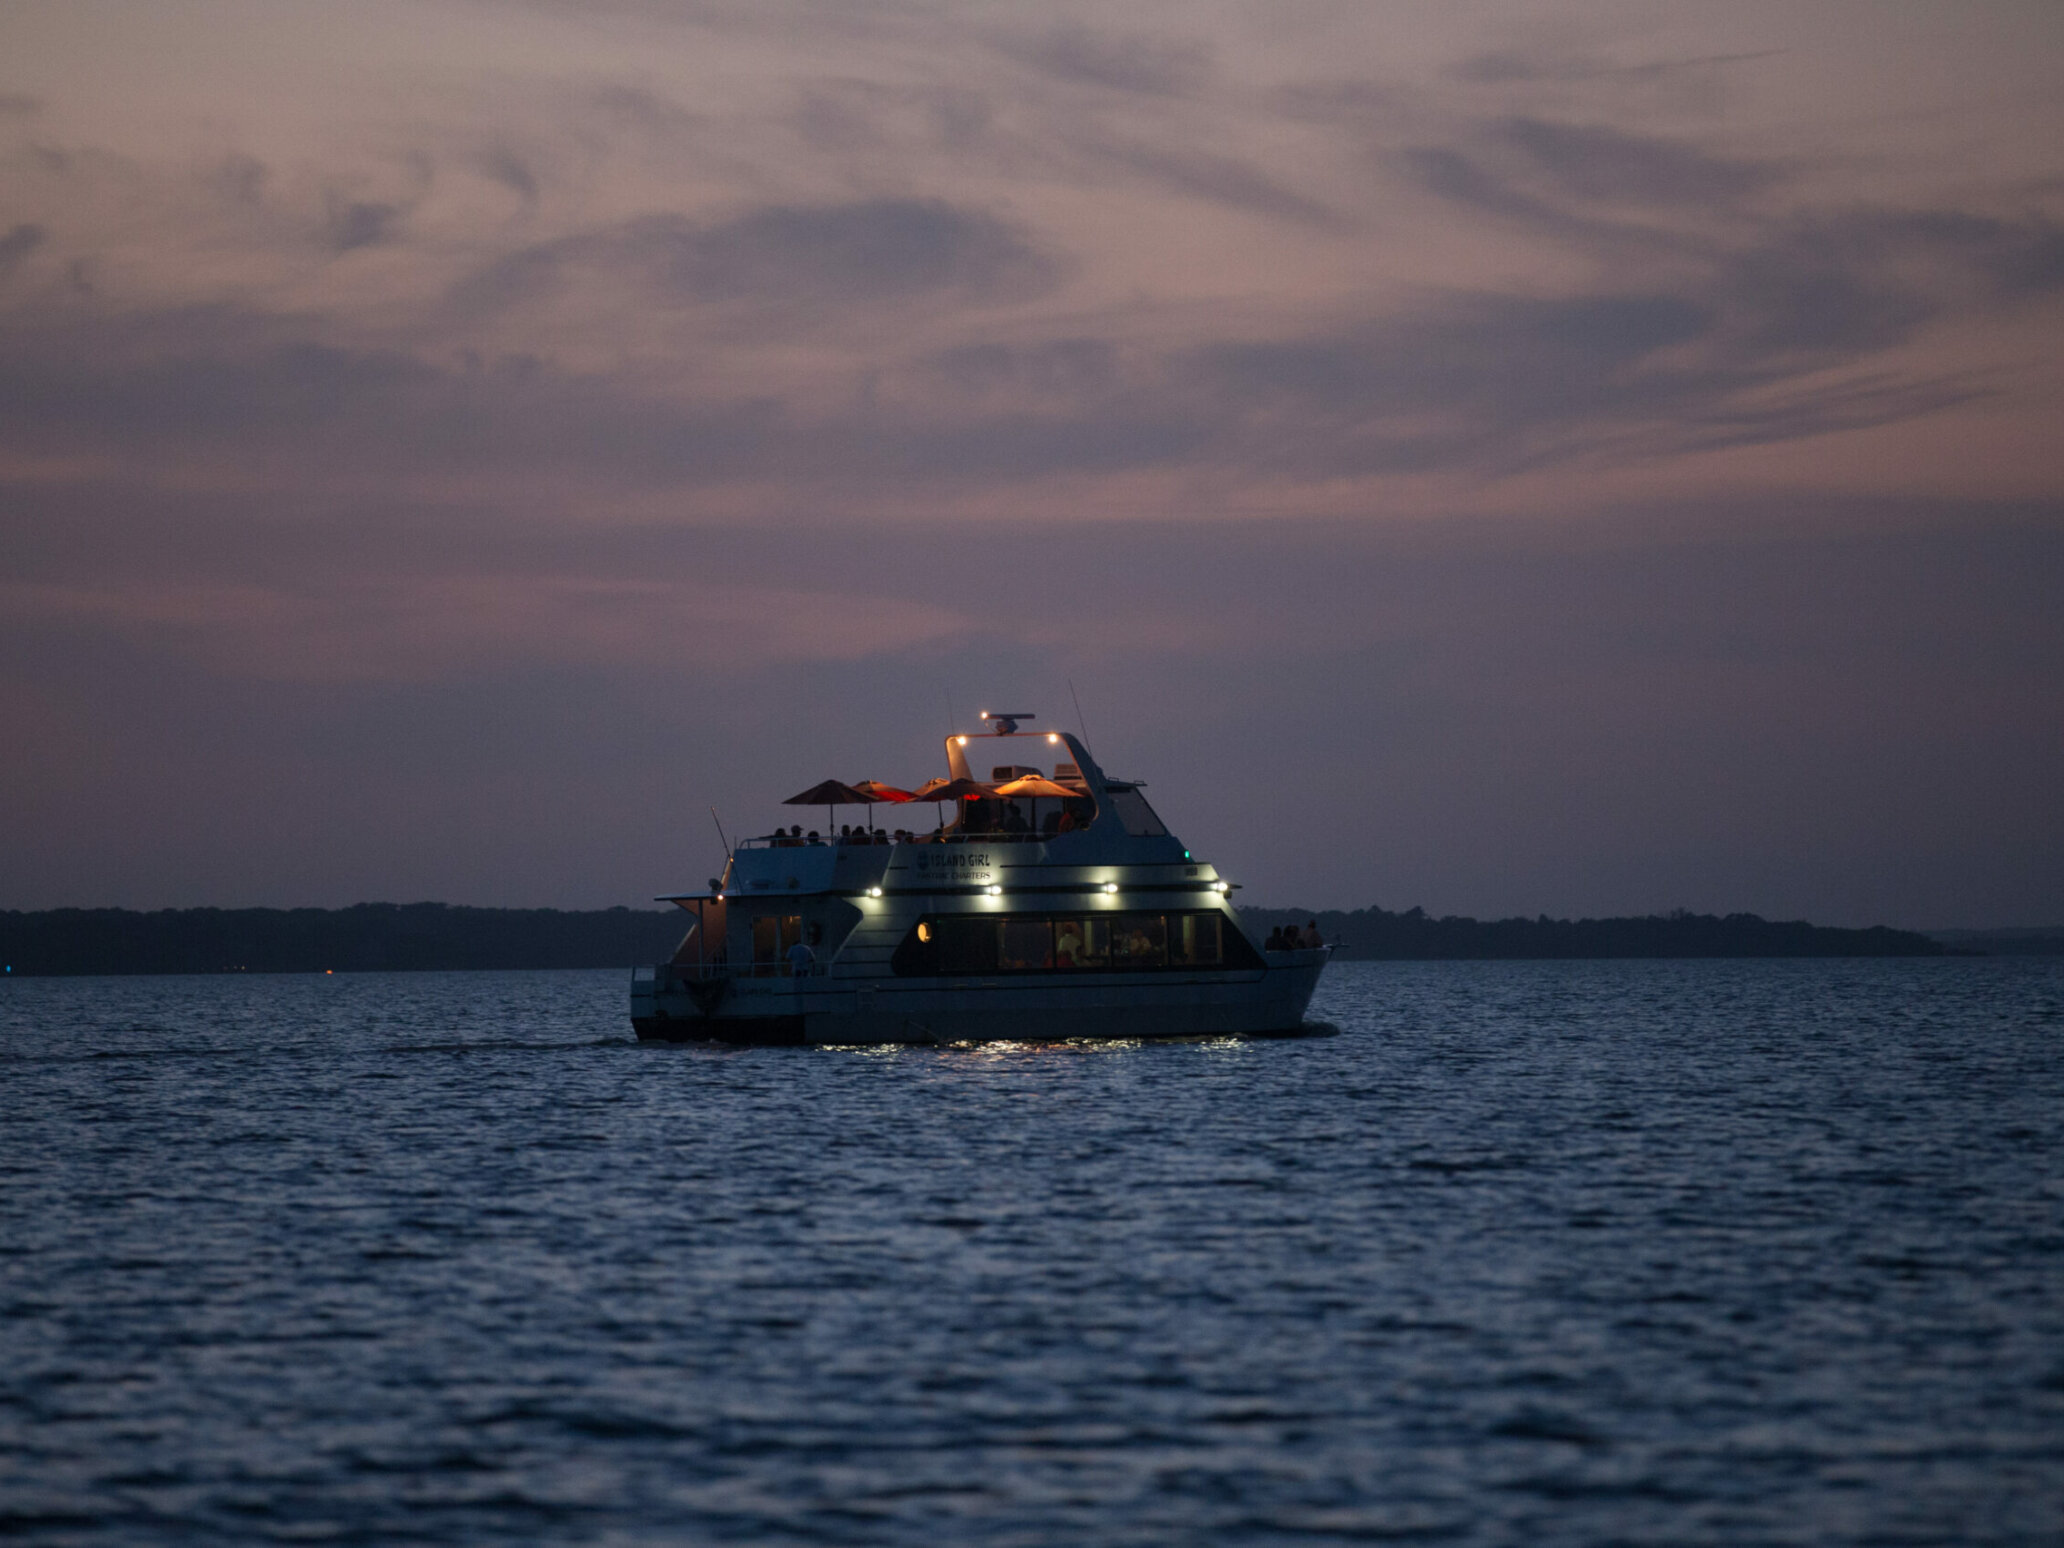 Fastrac Charters and Cruises :: Cruises, Charters, Tours, Experiences on  Lake Texoma – Public Cruises and Private Charters, Lake Tours, Water Taxi  Service on Lake Texoma